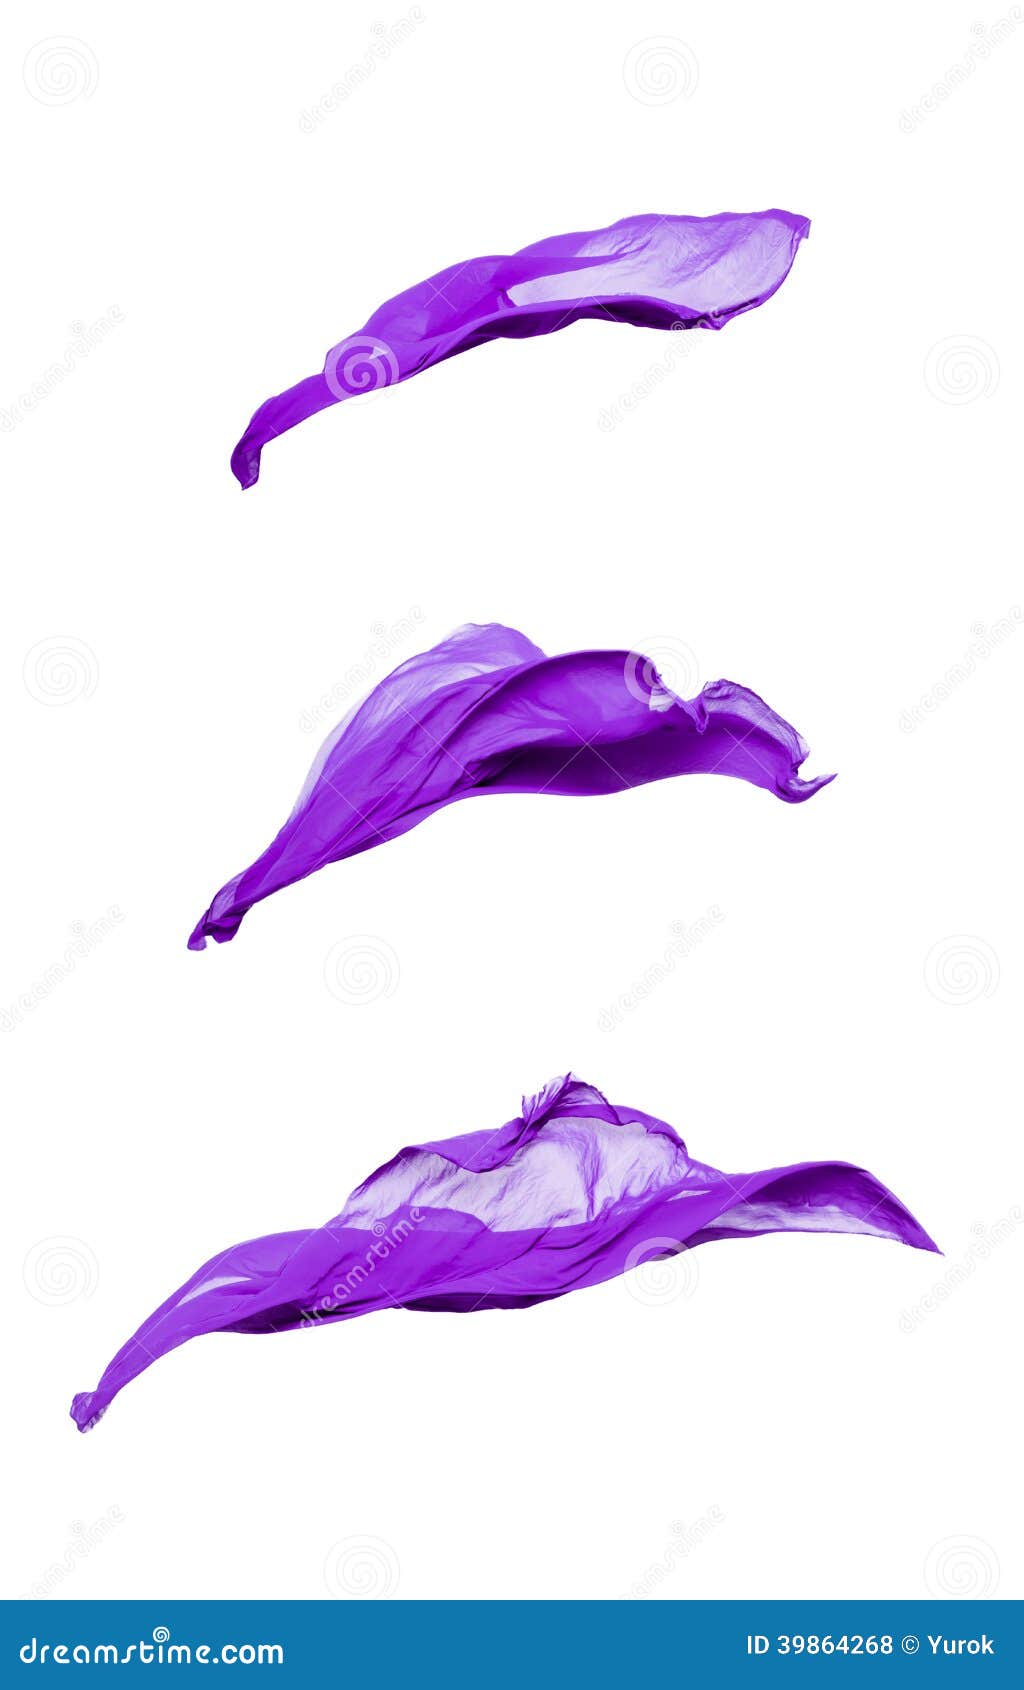 Purple Fabric Background Images – Browse 613,044 Stock Photos